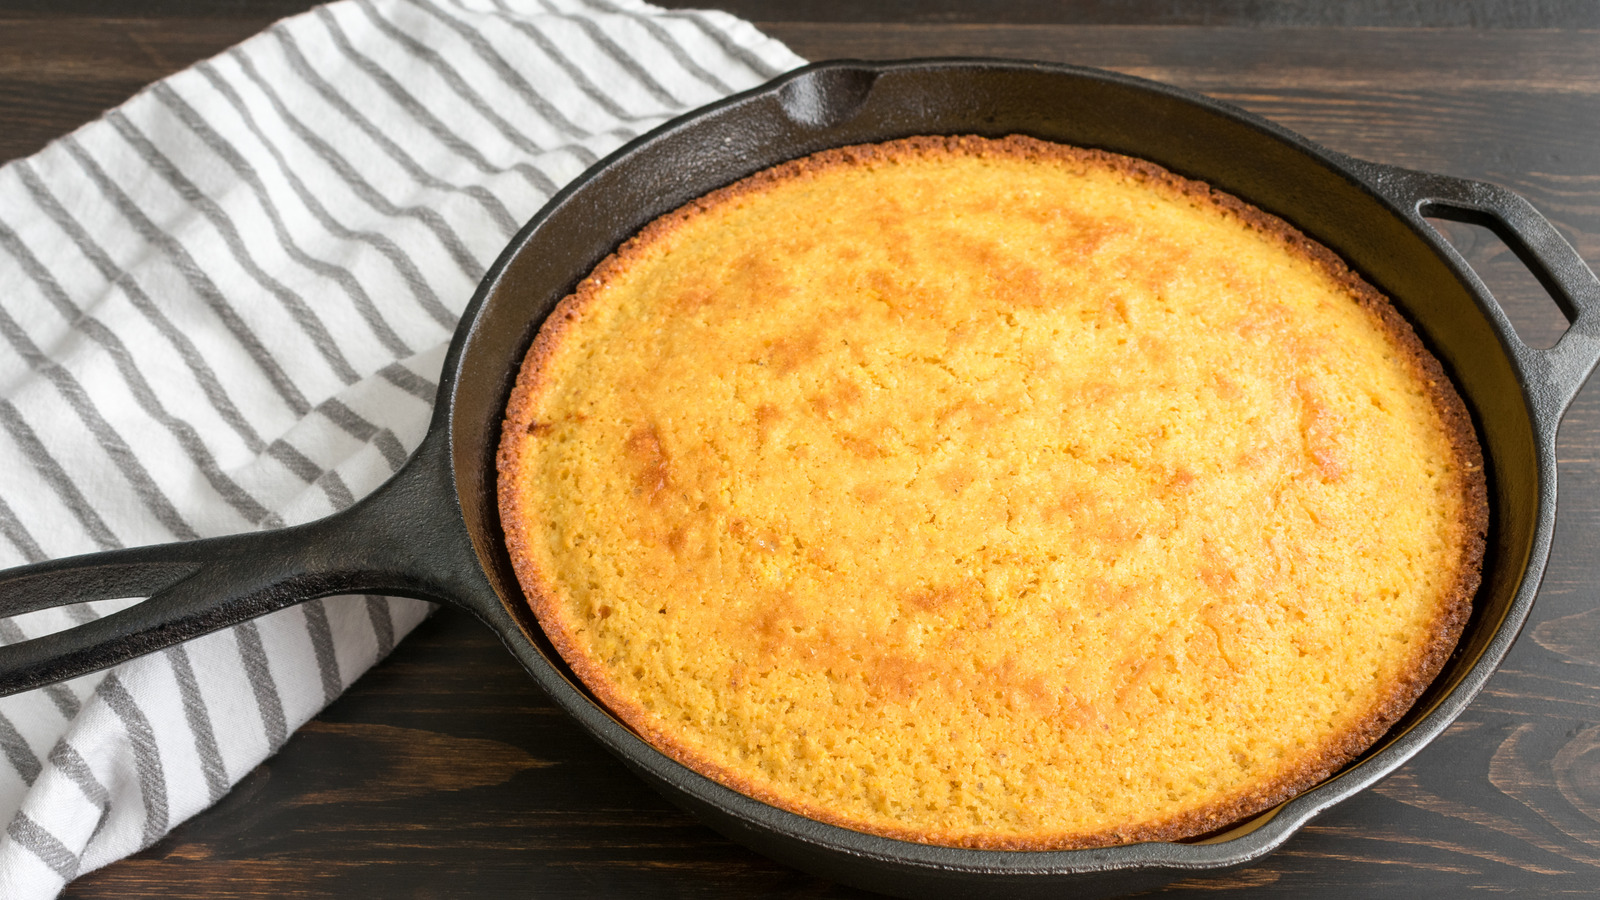 https://www.tastingtable.com/img/gallery/one-step-can-help-prevent-cornbread-from-sticking-to-a-cast-iron-skillet/l-intro-1653322314.jpg